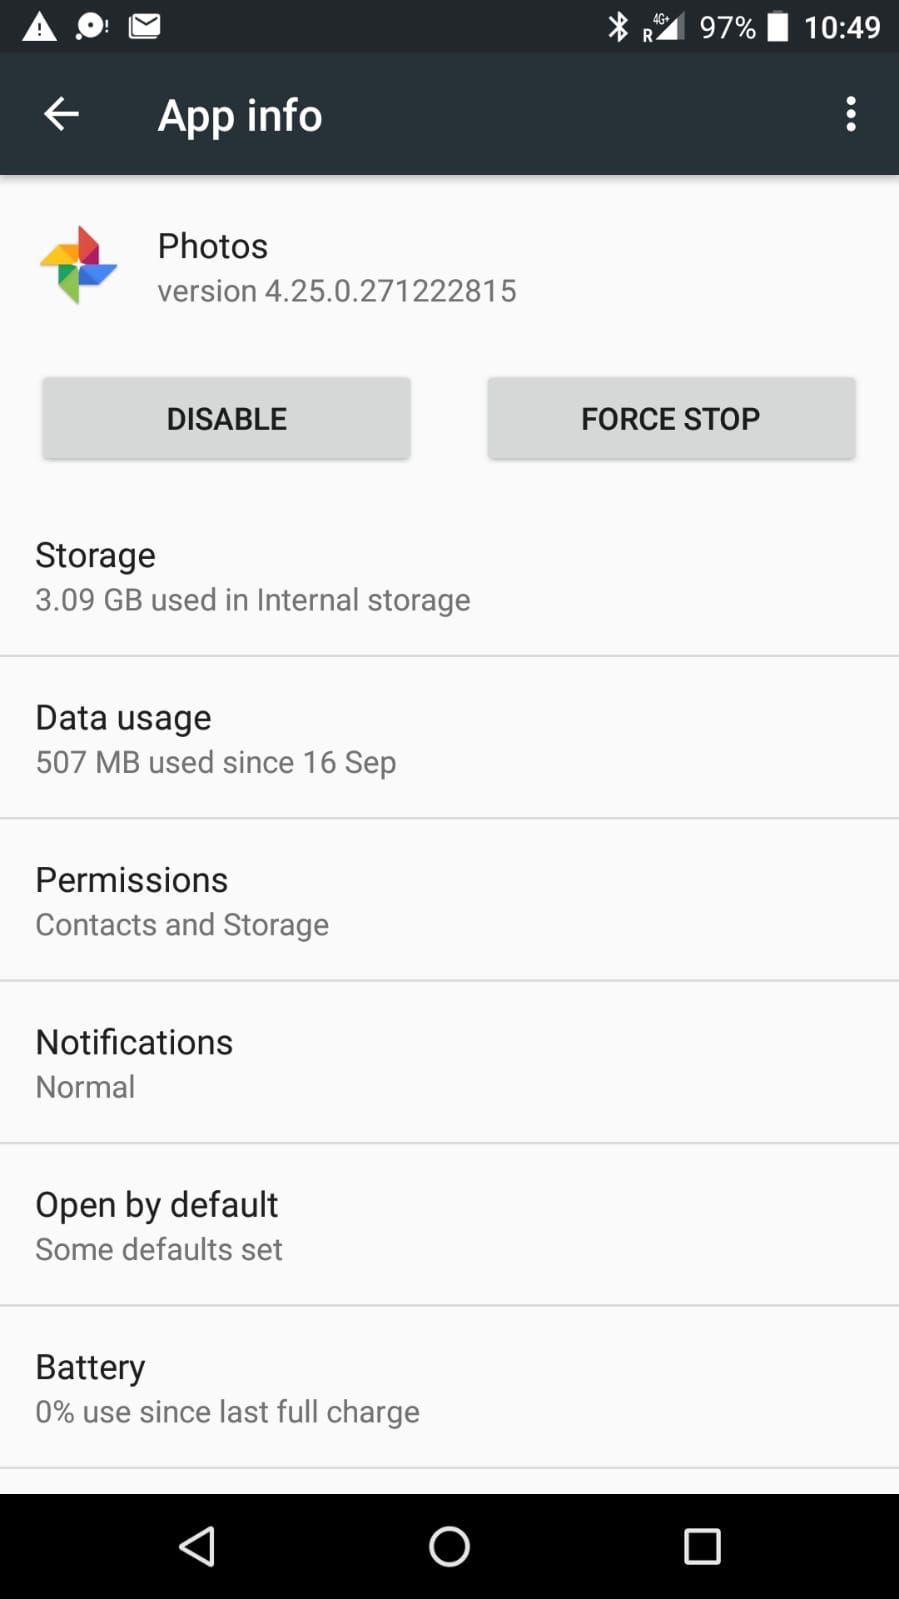 Locate and tap on "Google Photos" from the list of installed apps.
Select "Storage & cache" or "Storage" (depending on your device).